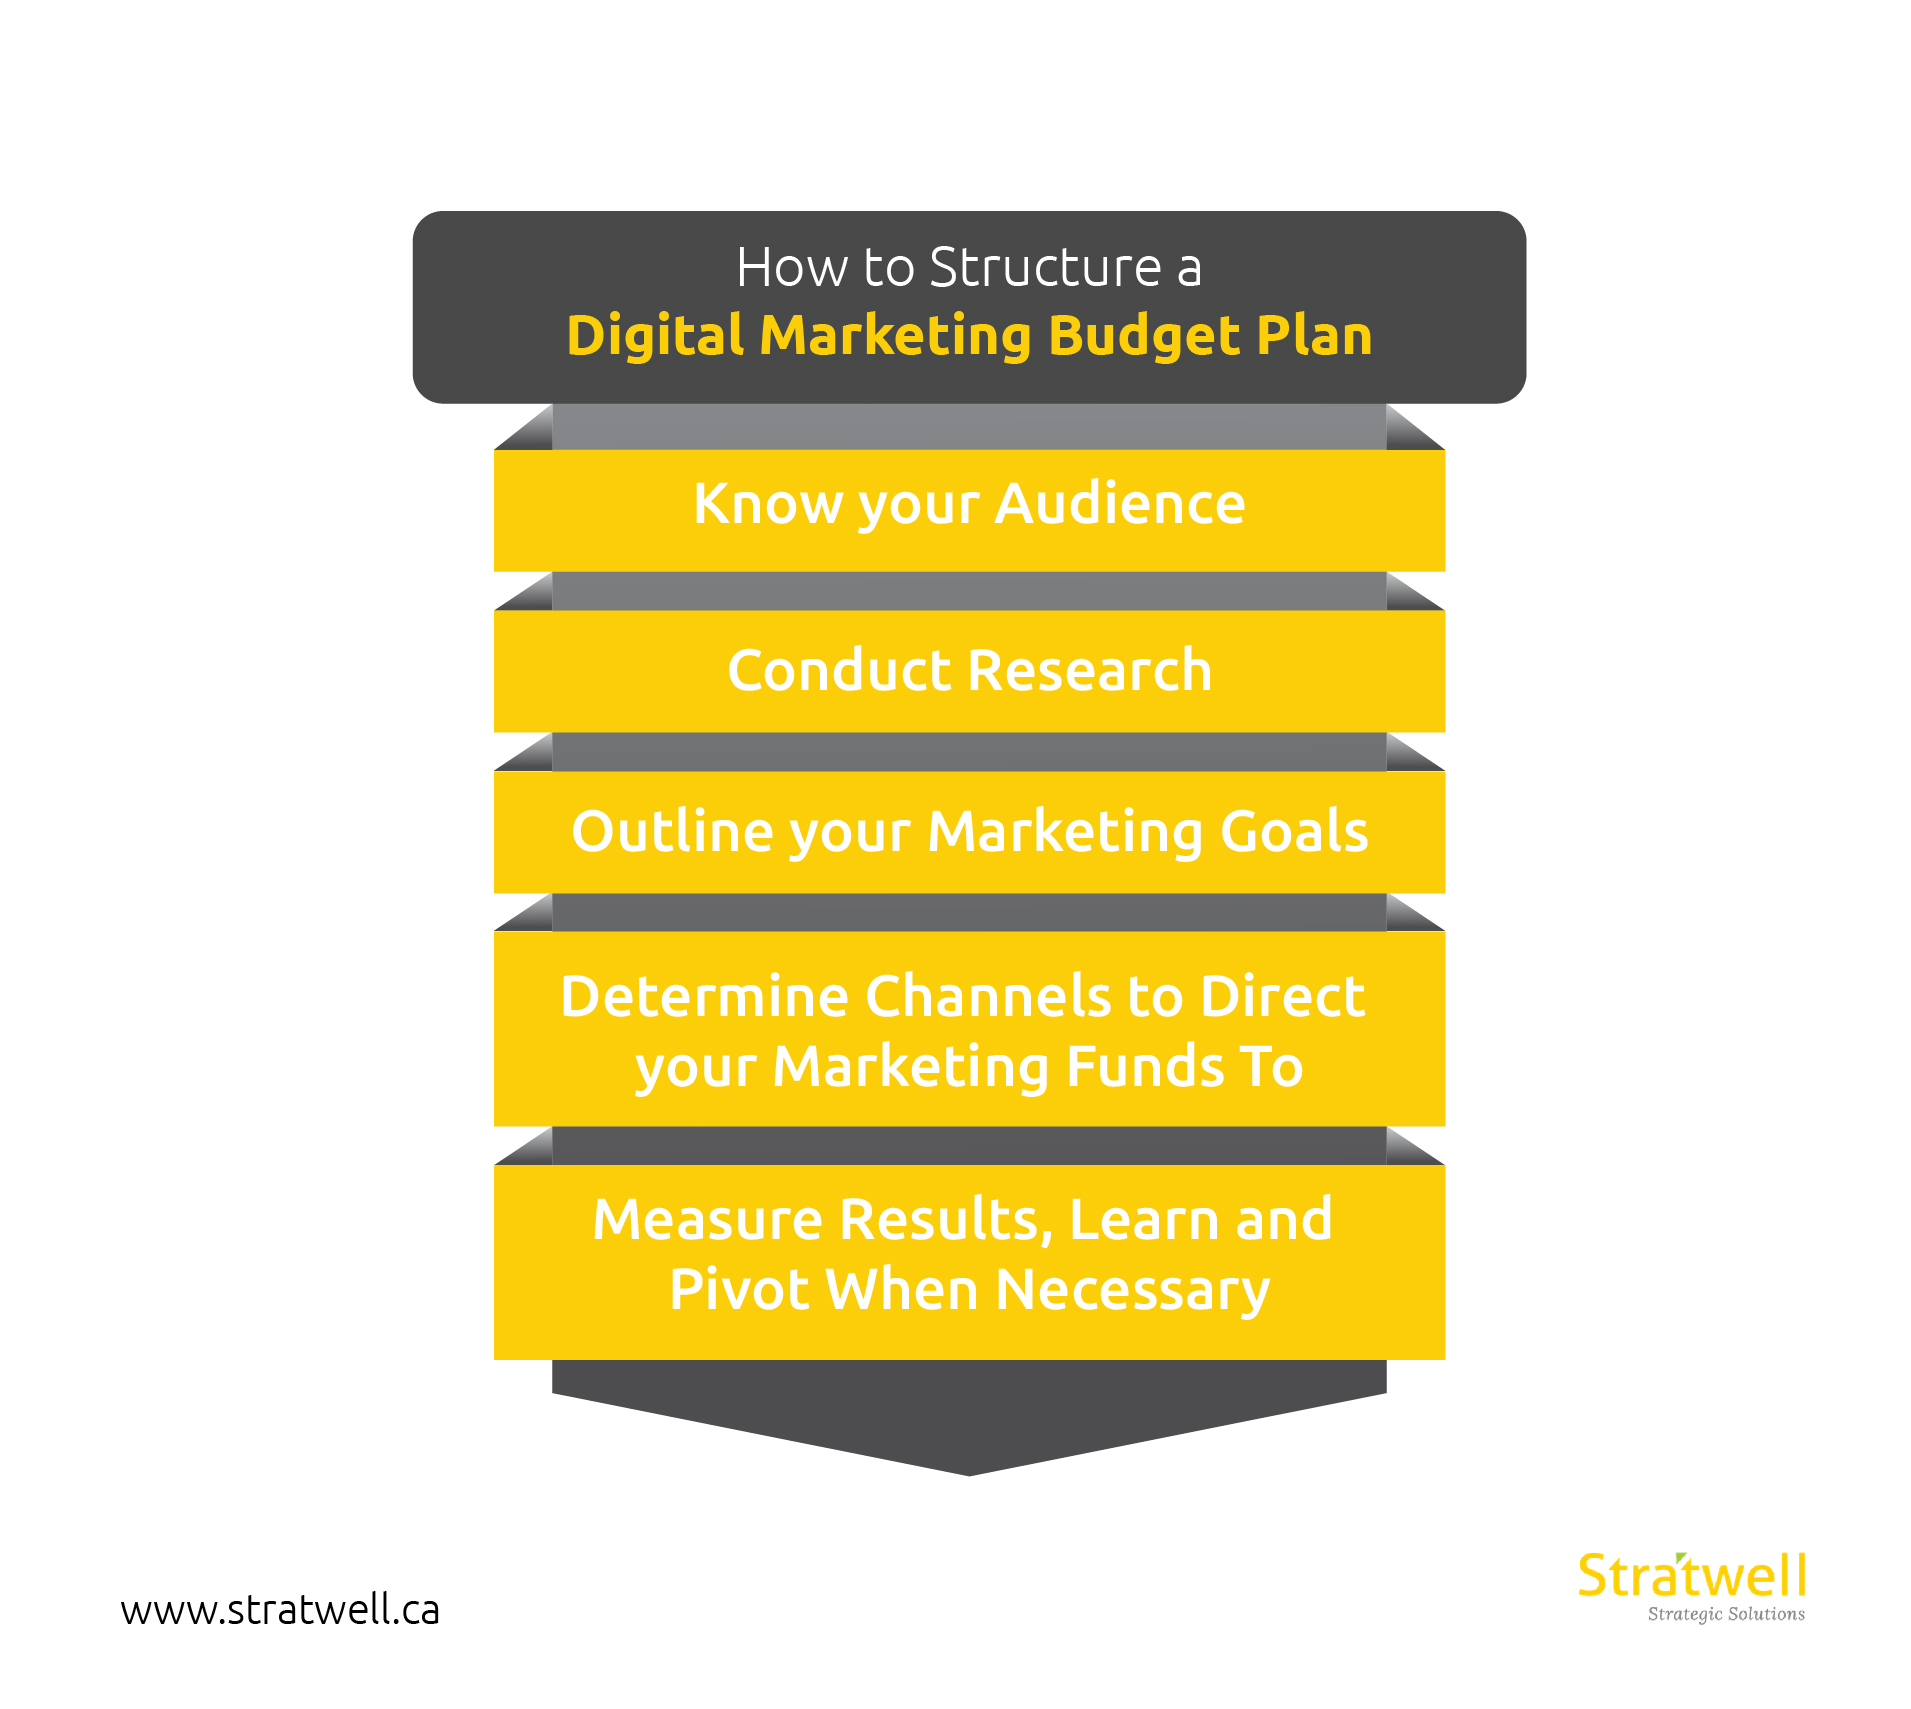 How Much Should I Spend? 5 Simple Steps to Structure a Digital